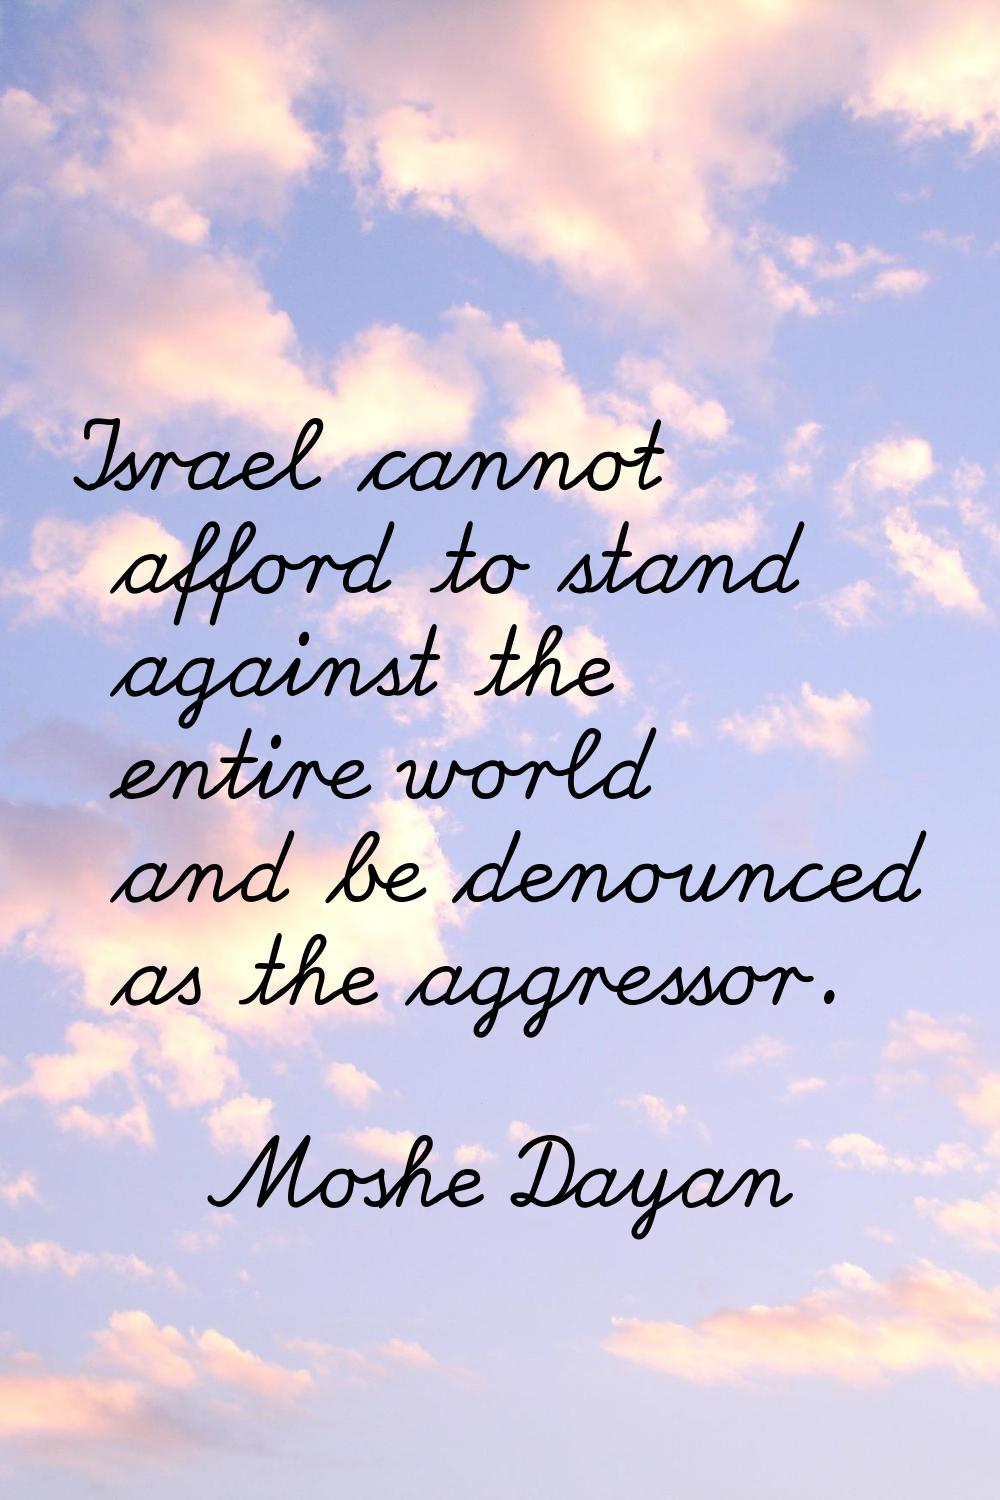 Israel cannot afford to stand against the entire world and be denounced as the aggressor.